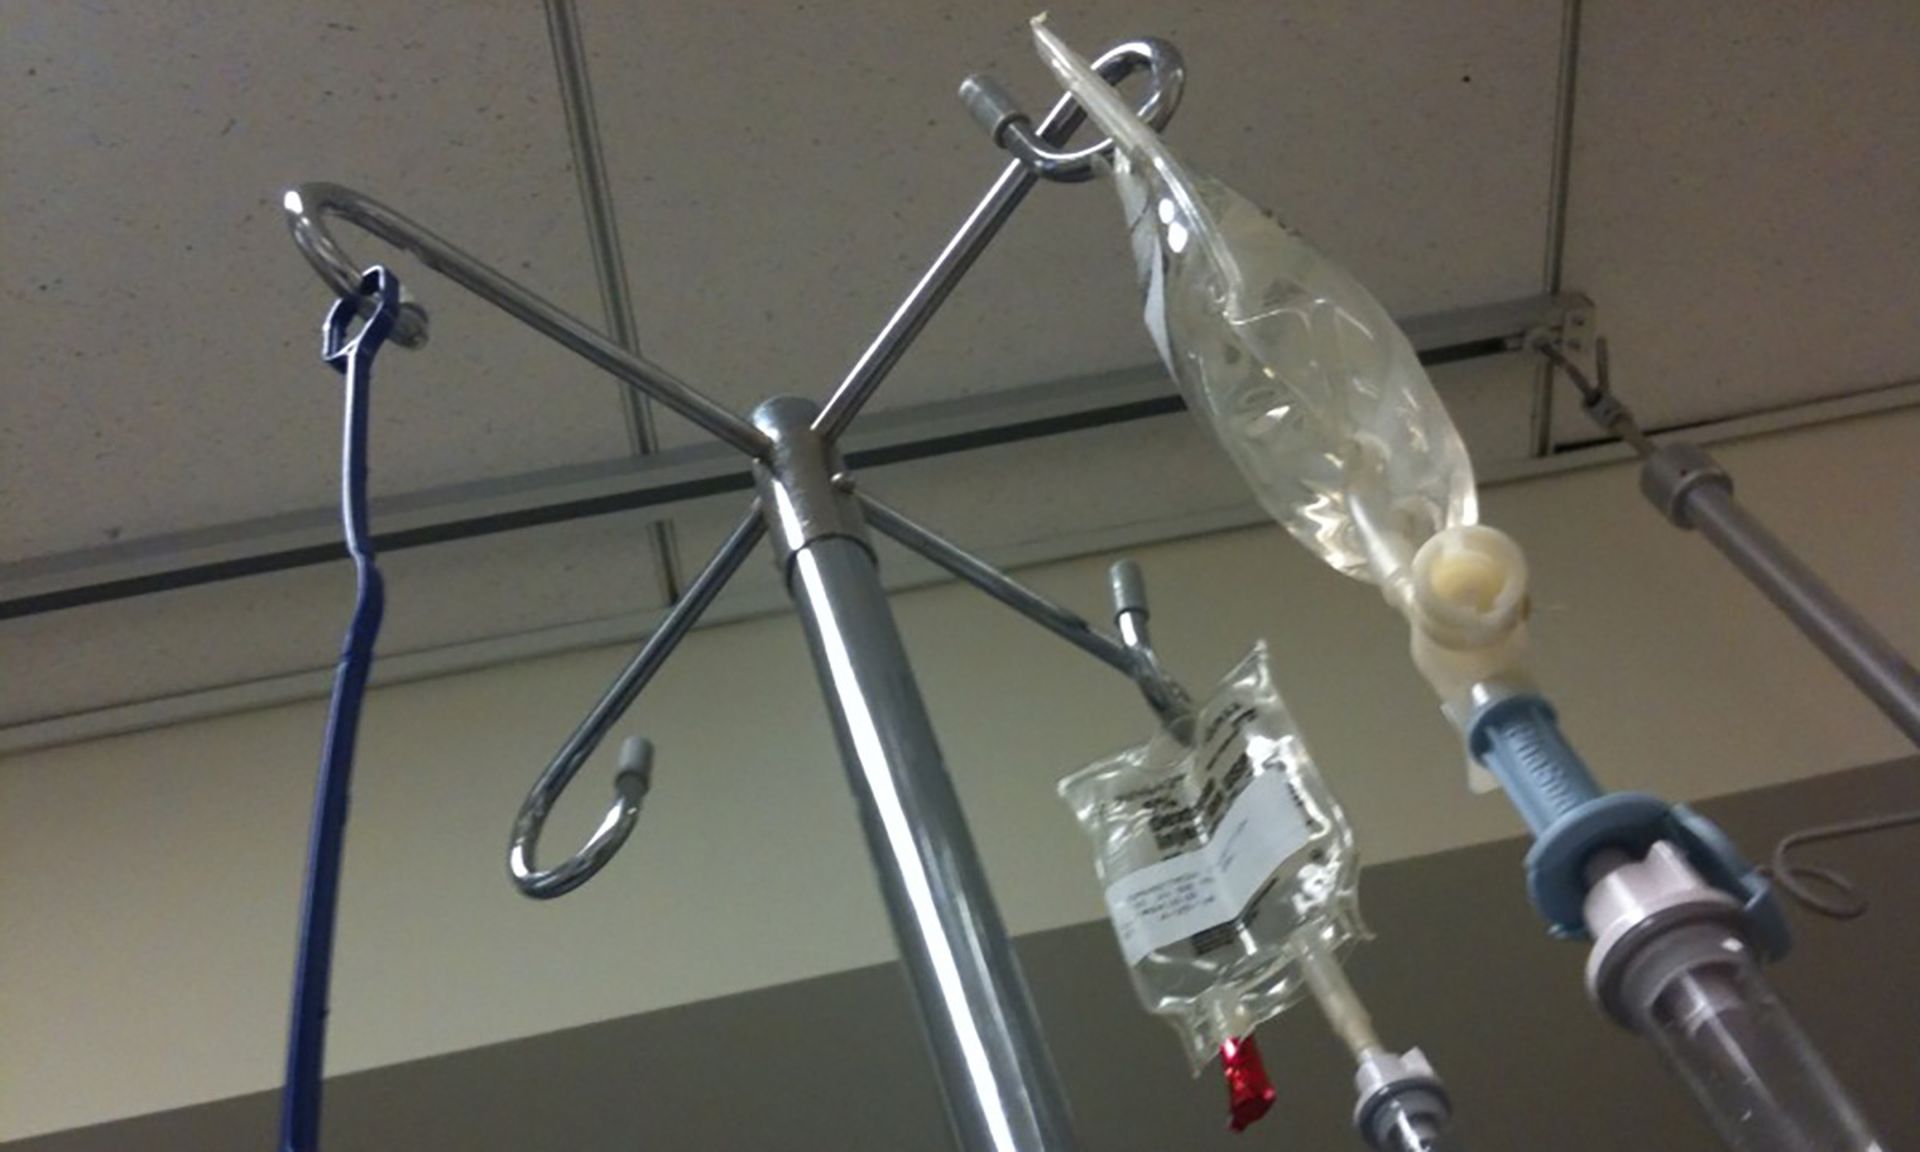 CISA issued an alert for Fresenius Kabi Agilia Connect Infusion Systems. Pictured: A cropped image of IV drips. (&#8220;Not a coat rack&#8221; by kbrookes is licensed under CC BY-NC-ND 2.0)